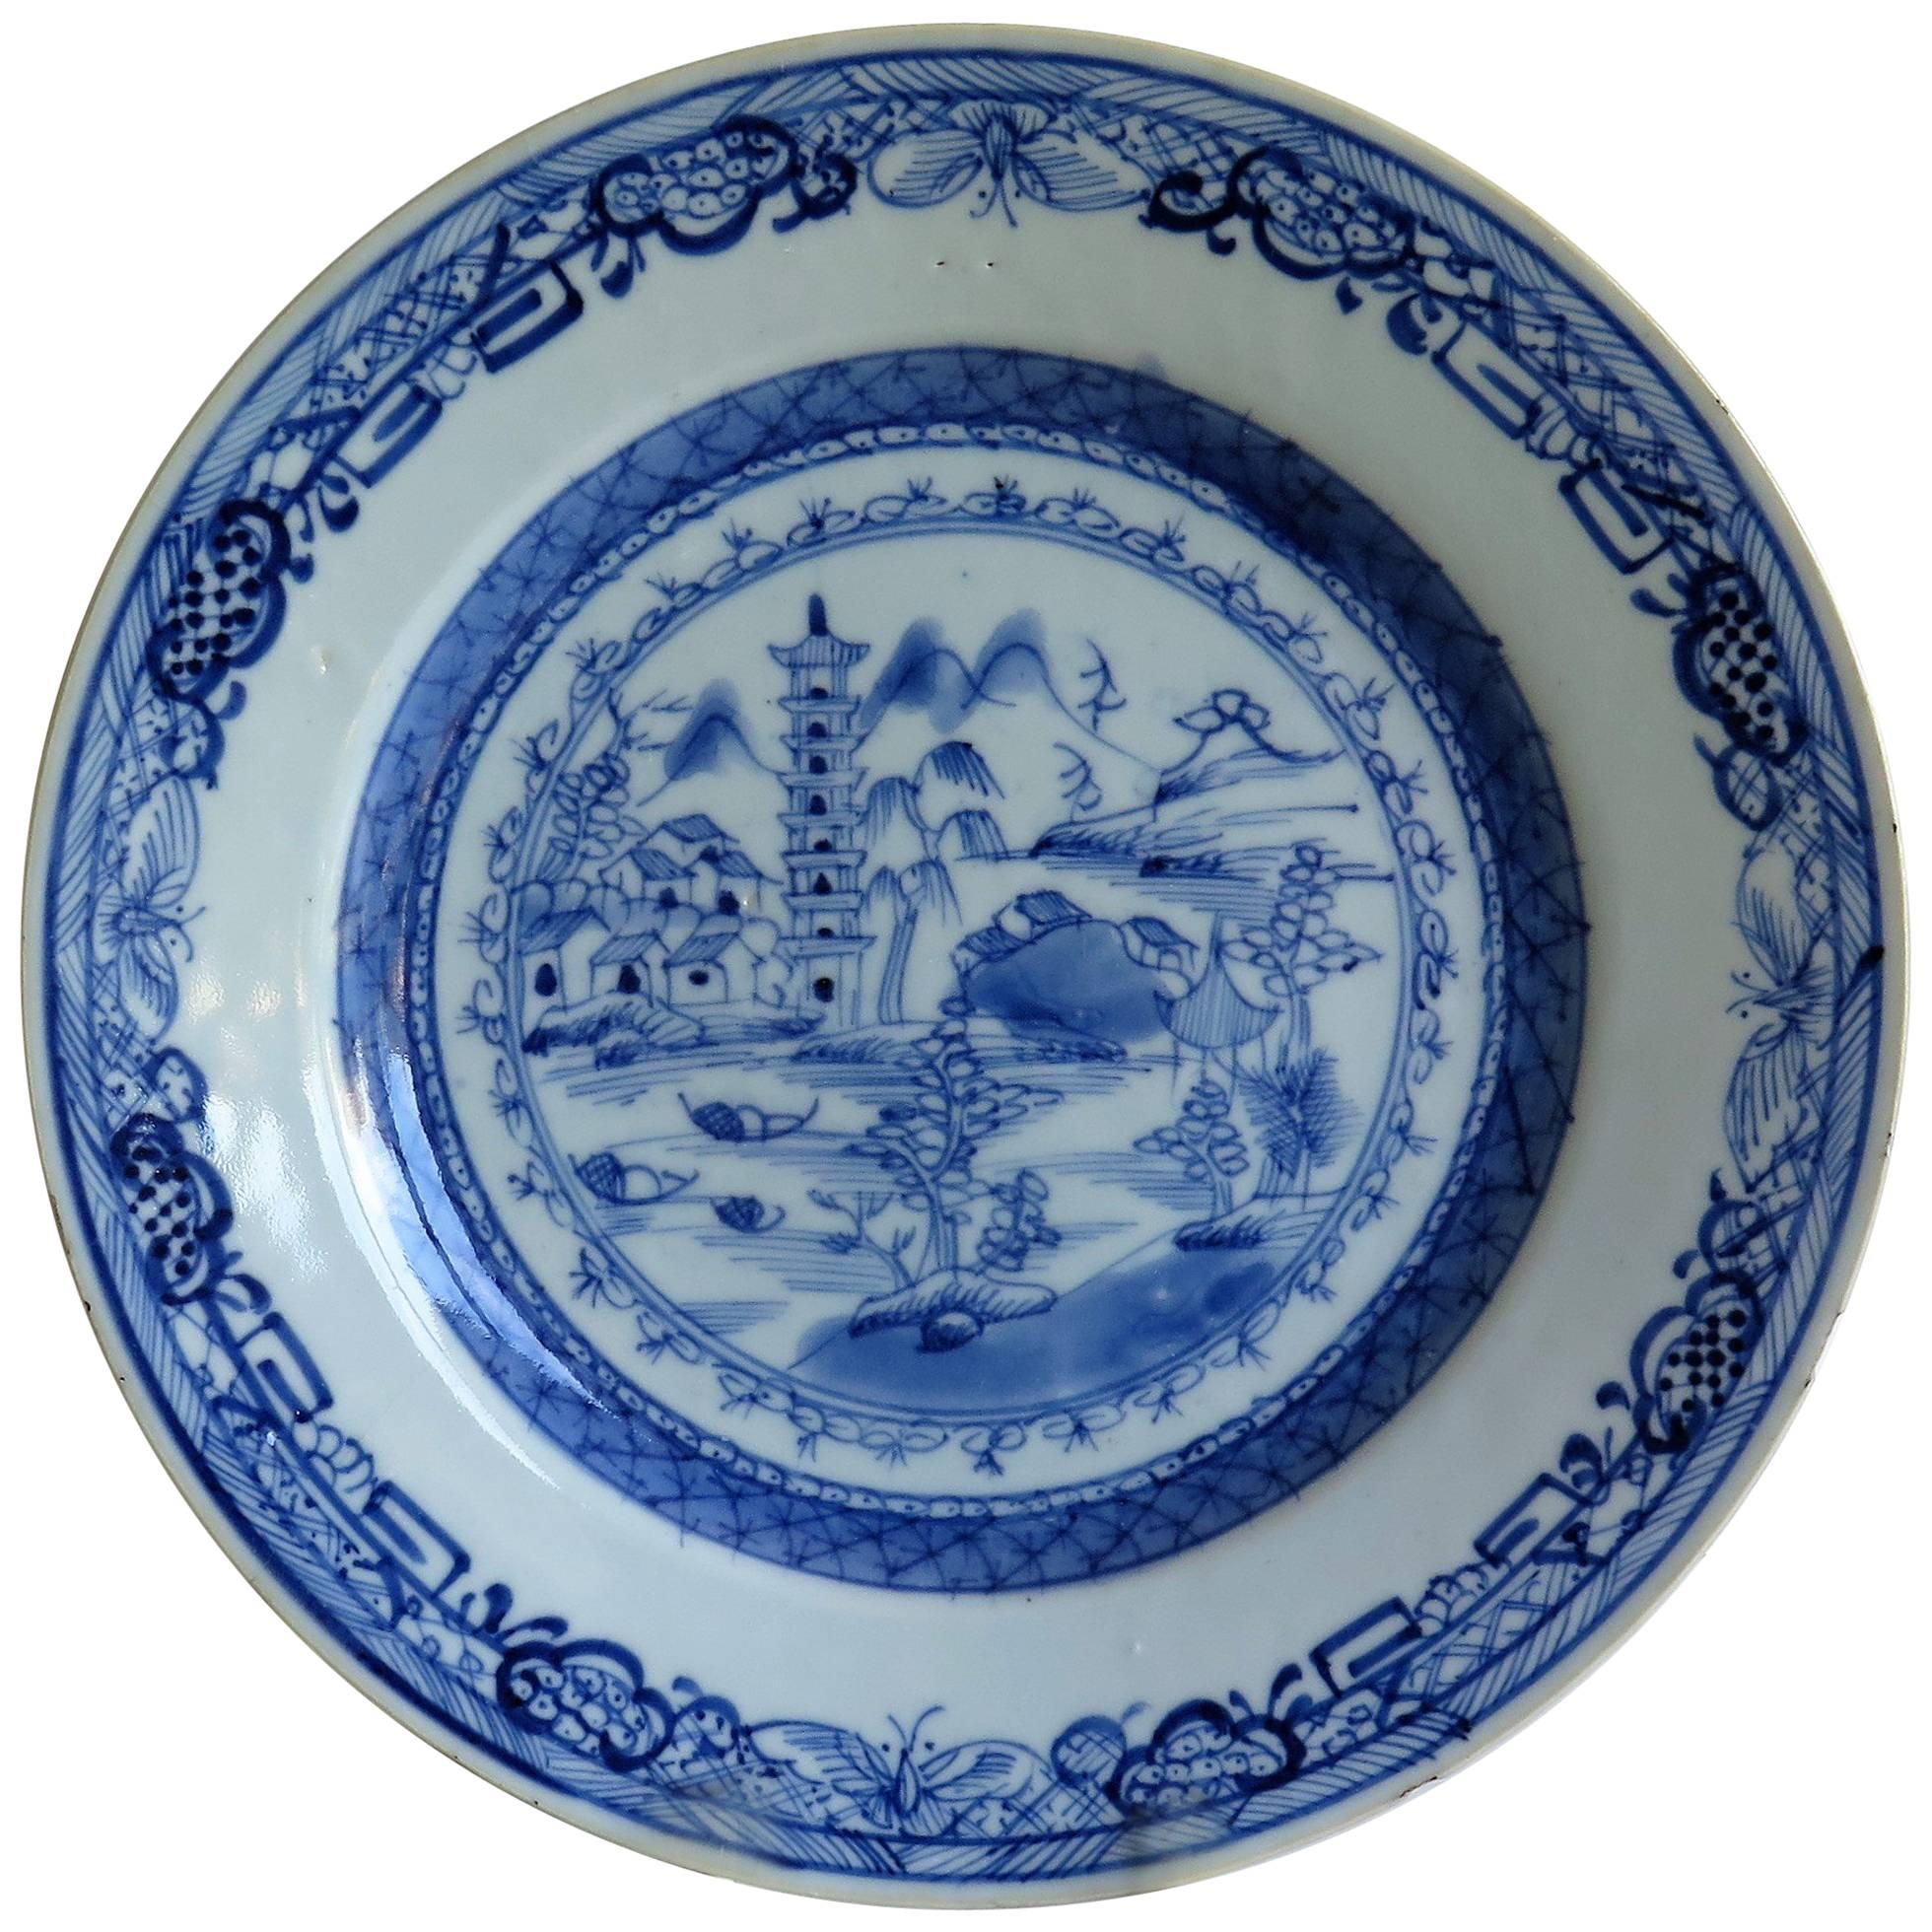 18th Century Chinese Export Blue and White Porcelain Plate, Qing Ca 1780